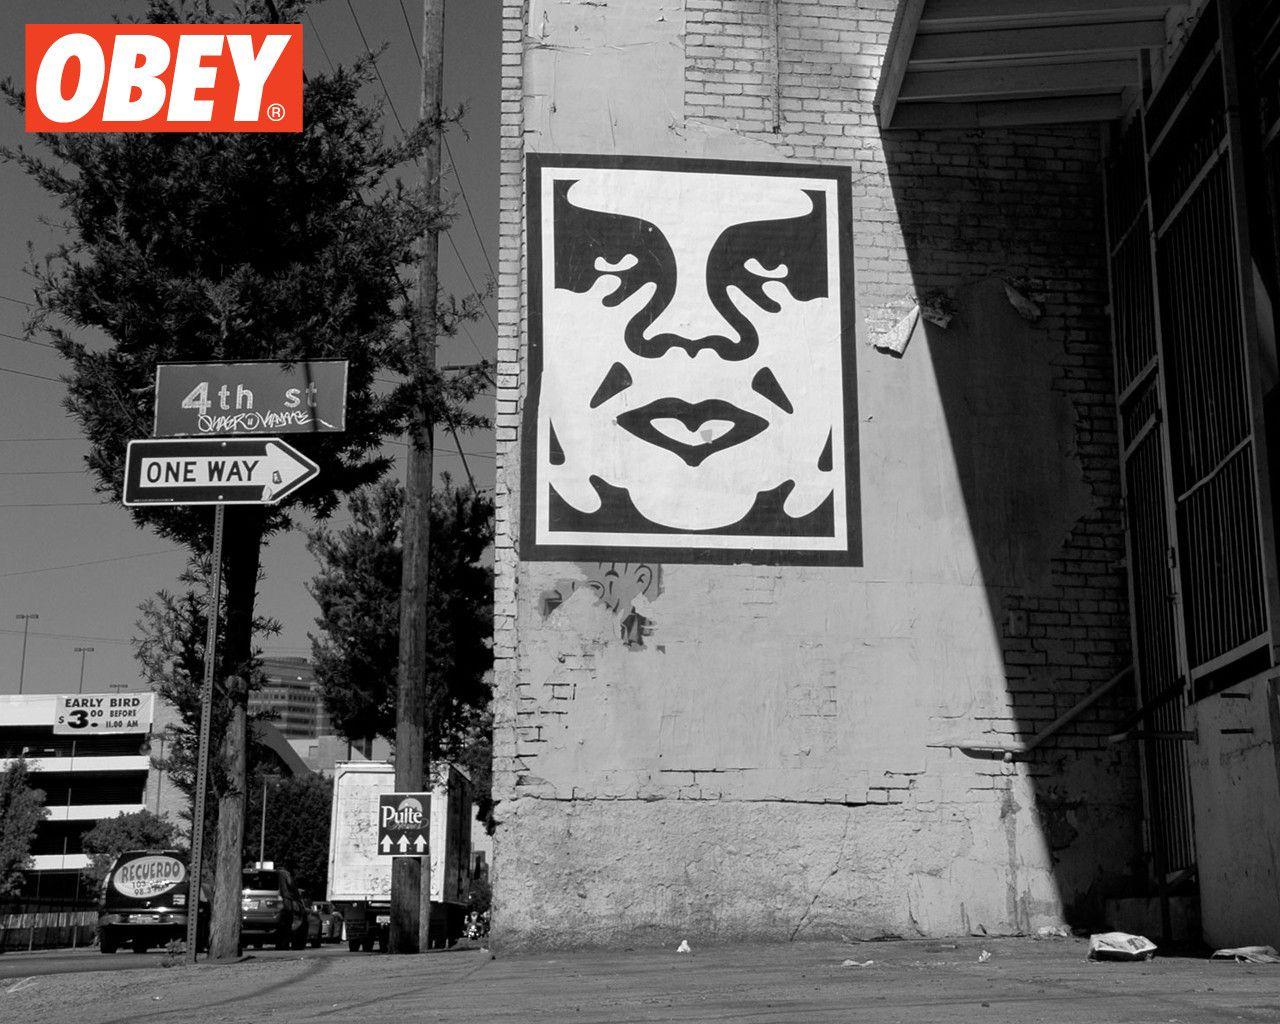 Obey Wallpaper For Room. Large HD Wallpaper Database